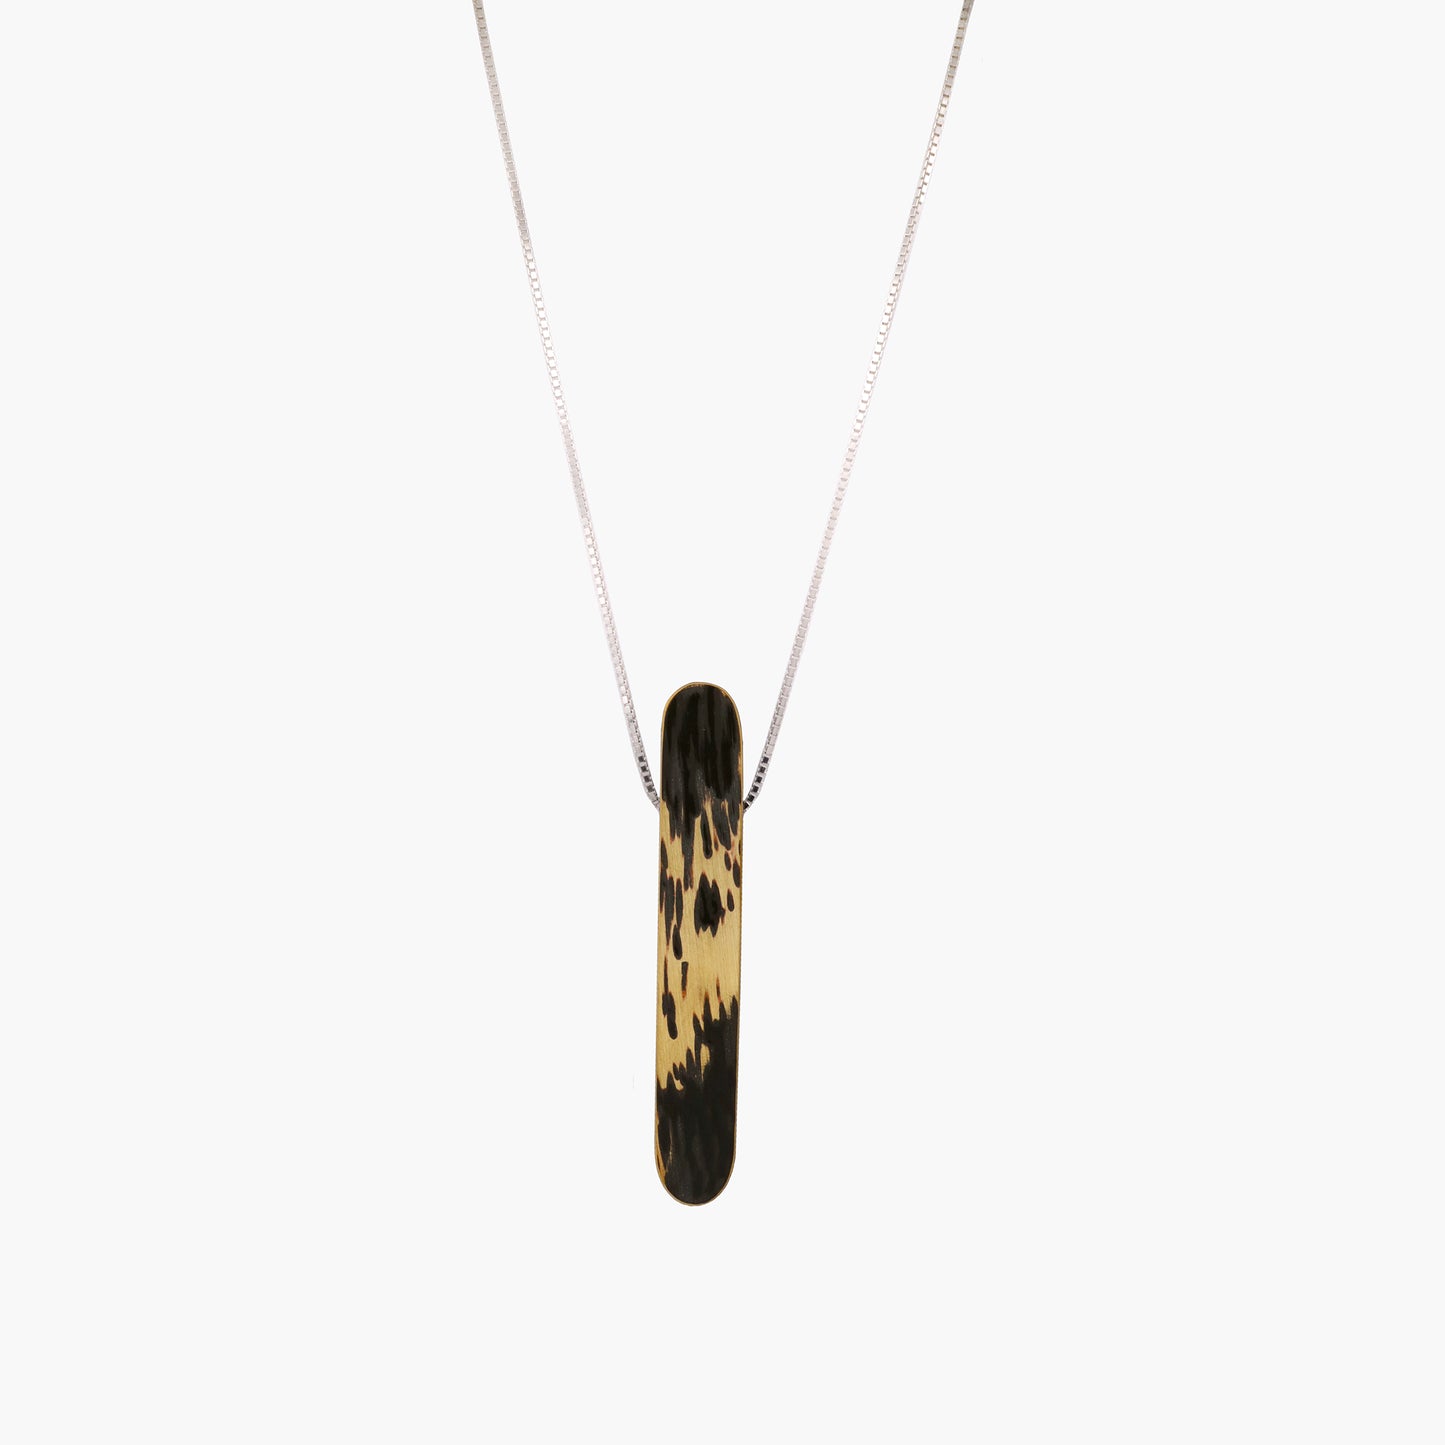 Long Rounded Component Lite necklace